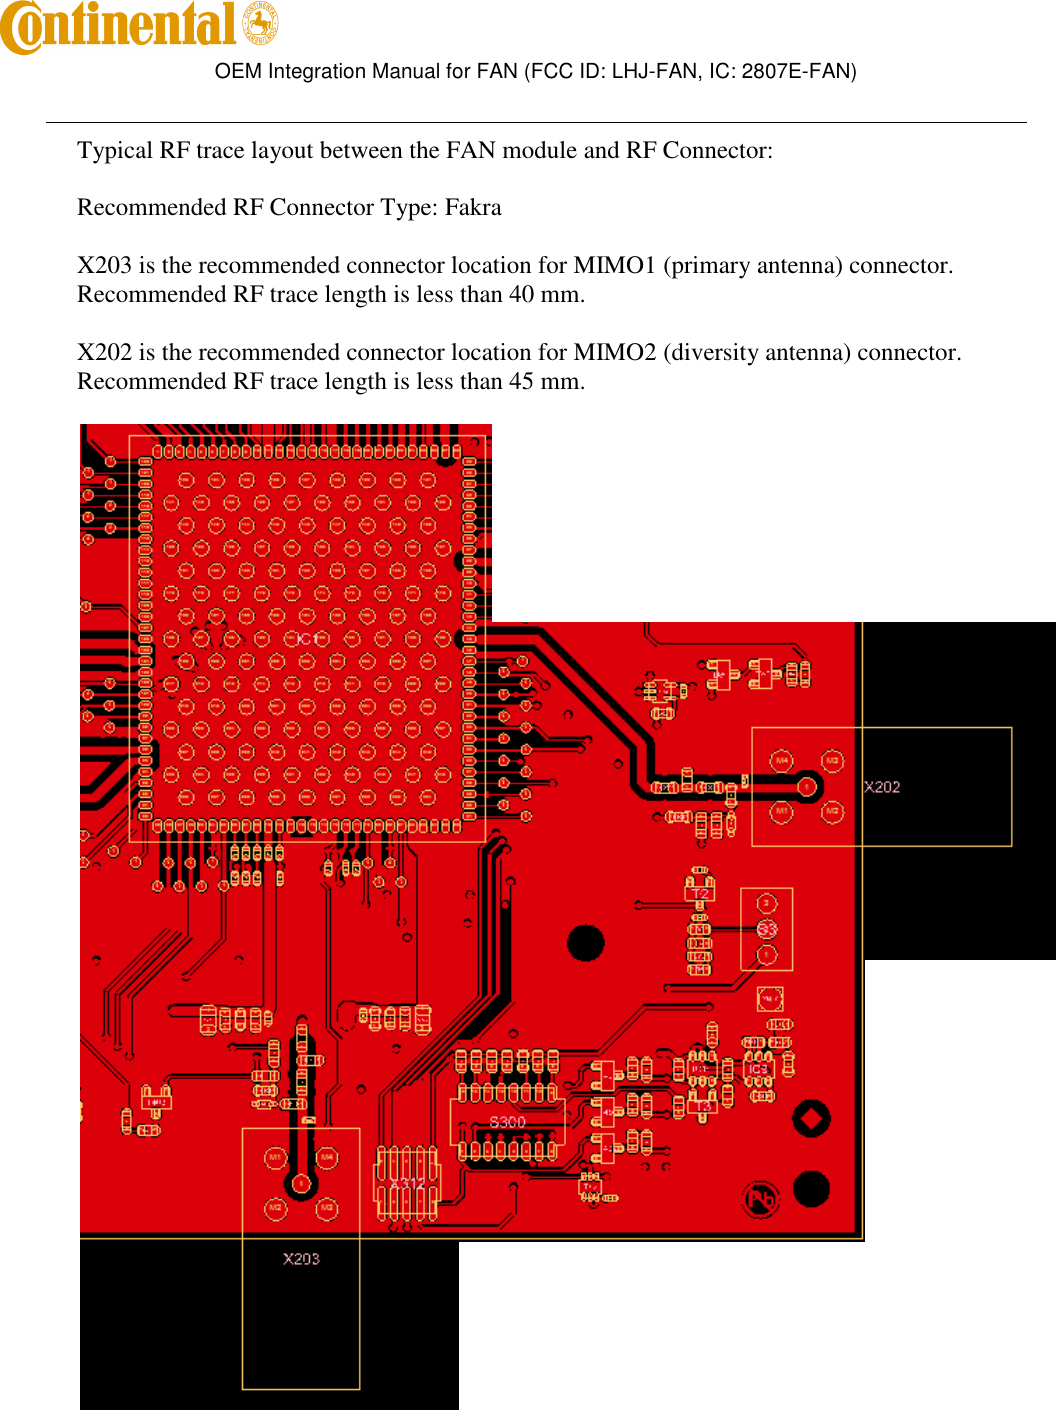        OEM Integration Manual for FAN (FCC ID: LHJ-FAN, IC: 2807E-FAN)   Typical RF trace layout between the FAN module and RF Connector: Recommended RF Connector Type: Fakra X203 is the recommended connector location for MIMO1 (primary antenna) connector.  Recommended RF trace length is less than 40 mm. X202 is the recommended connector location for MIMO2 (diversity antenna) connector. Recommended RF trace length is less than 45 mm.  